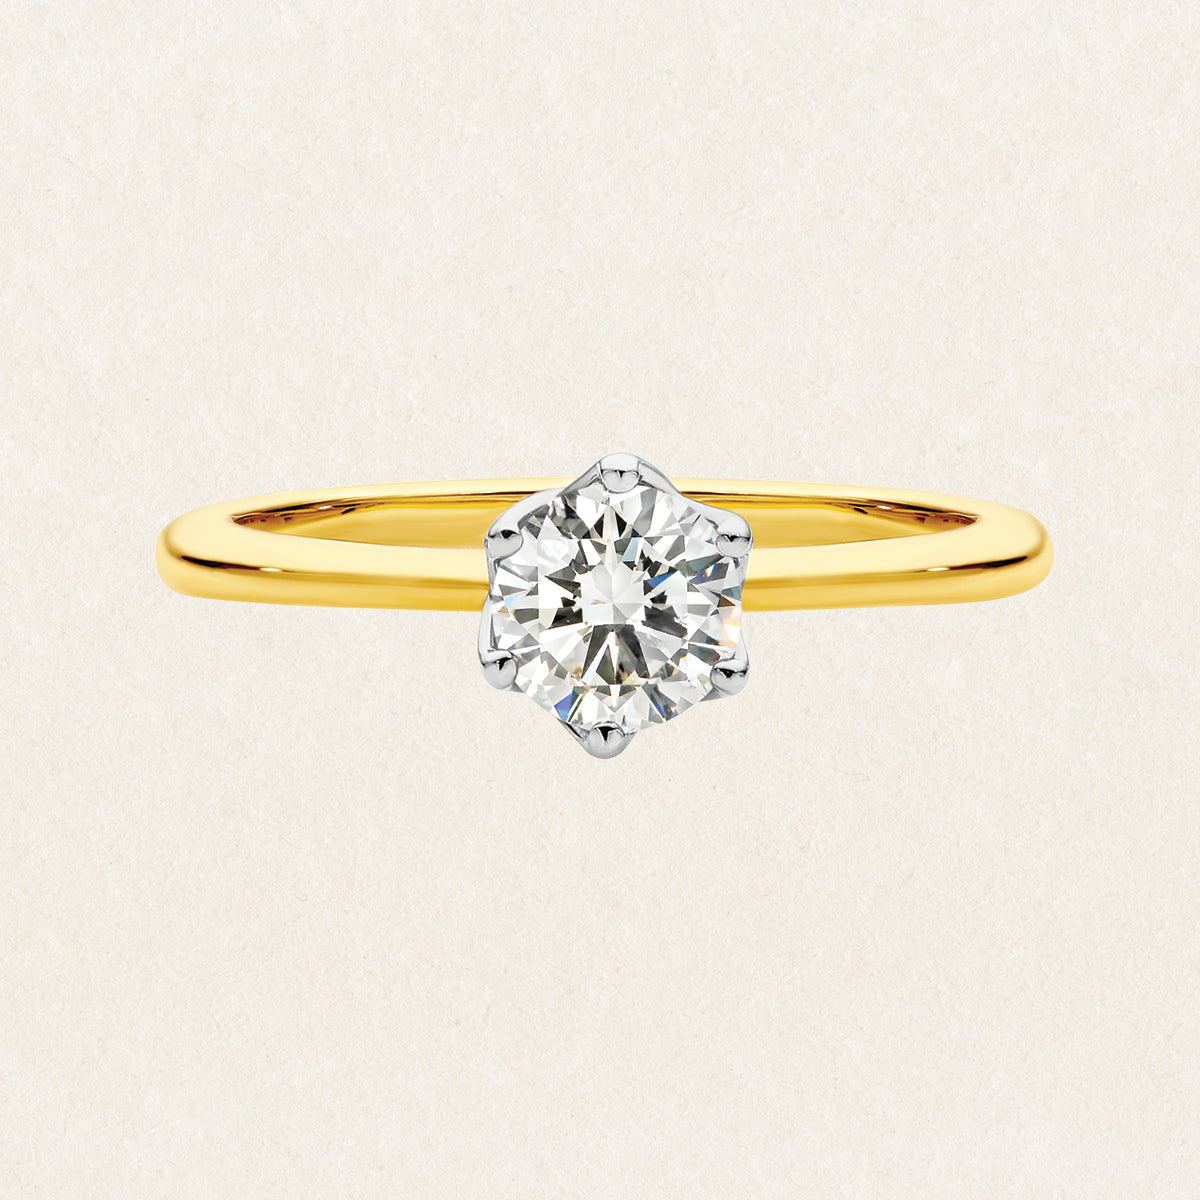 Brilliant round cut 0.70ct lab grown diamond solitaire ring made with 18k yellow and white gold